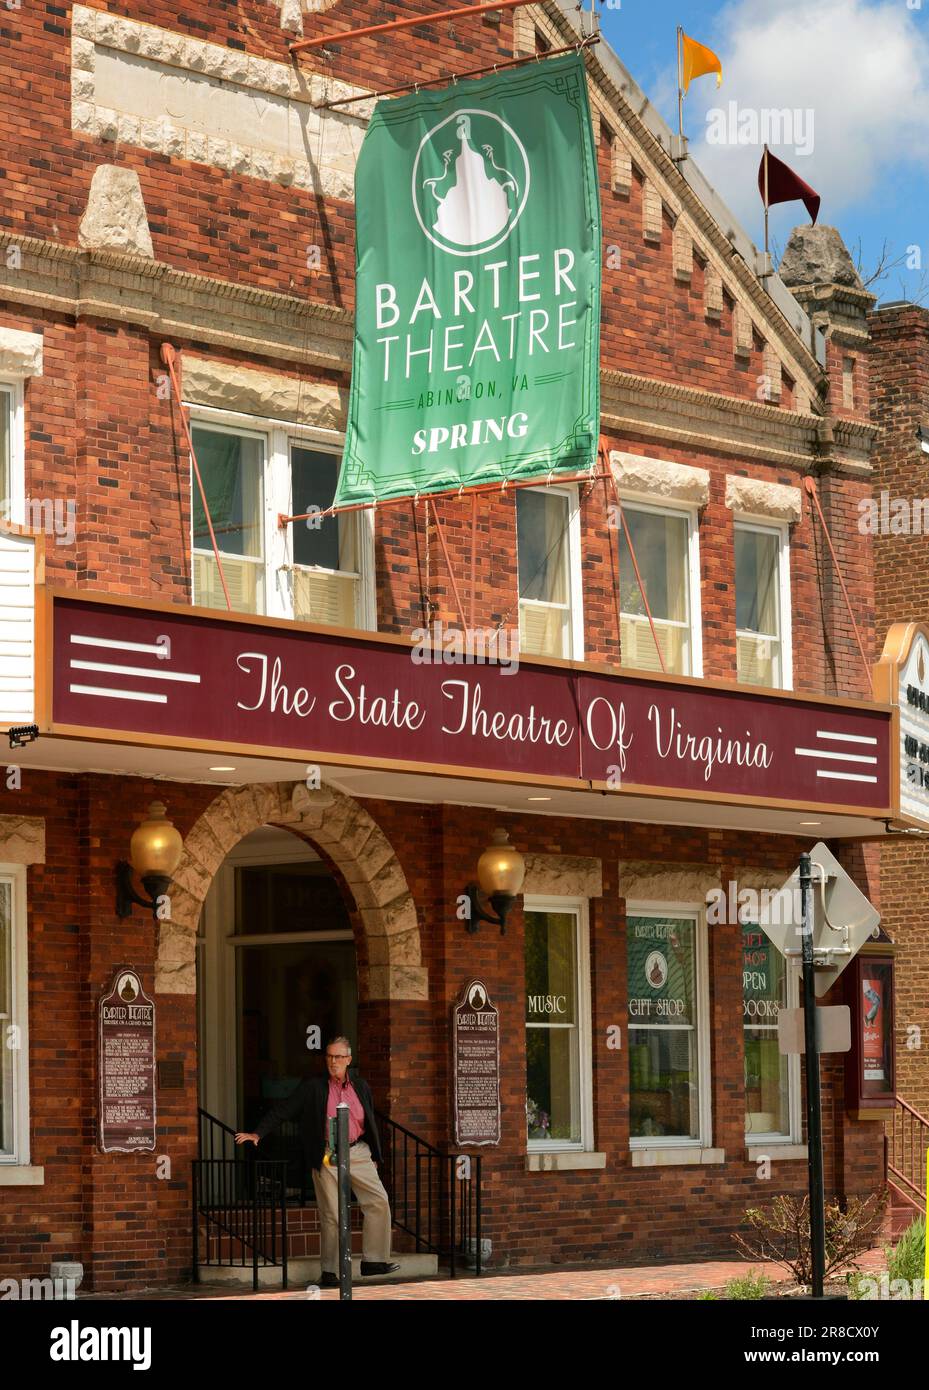 The Barter Theatre, which opened in 1933 in Abingdon, Virginia, is the longest-running professional Equity theatre in the United States. Stock Photo